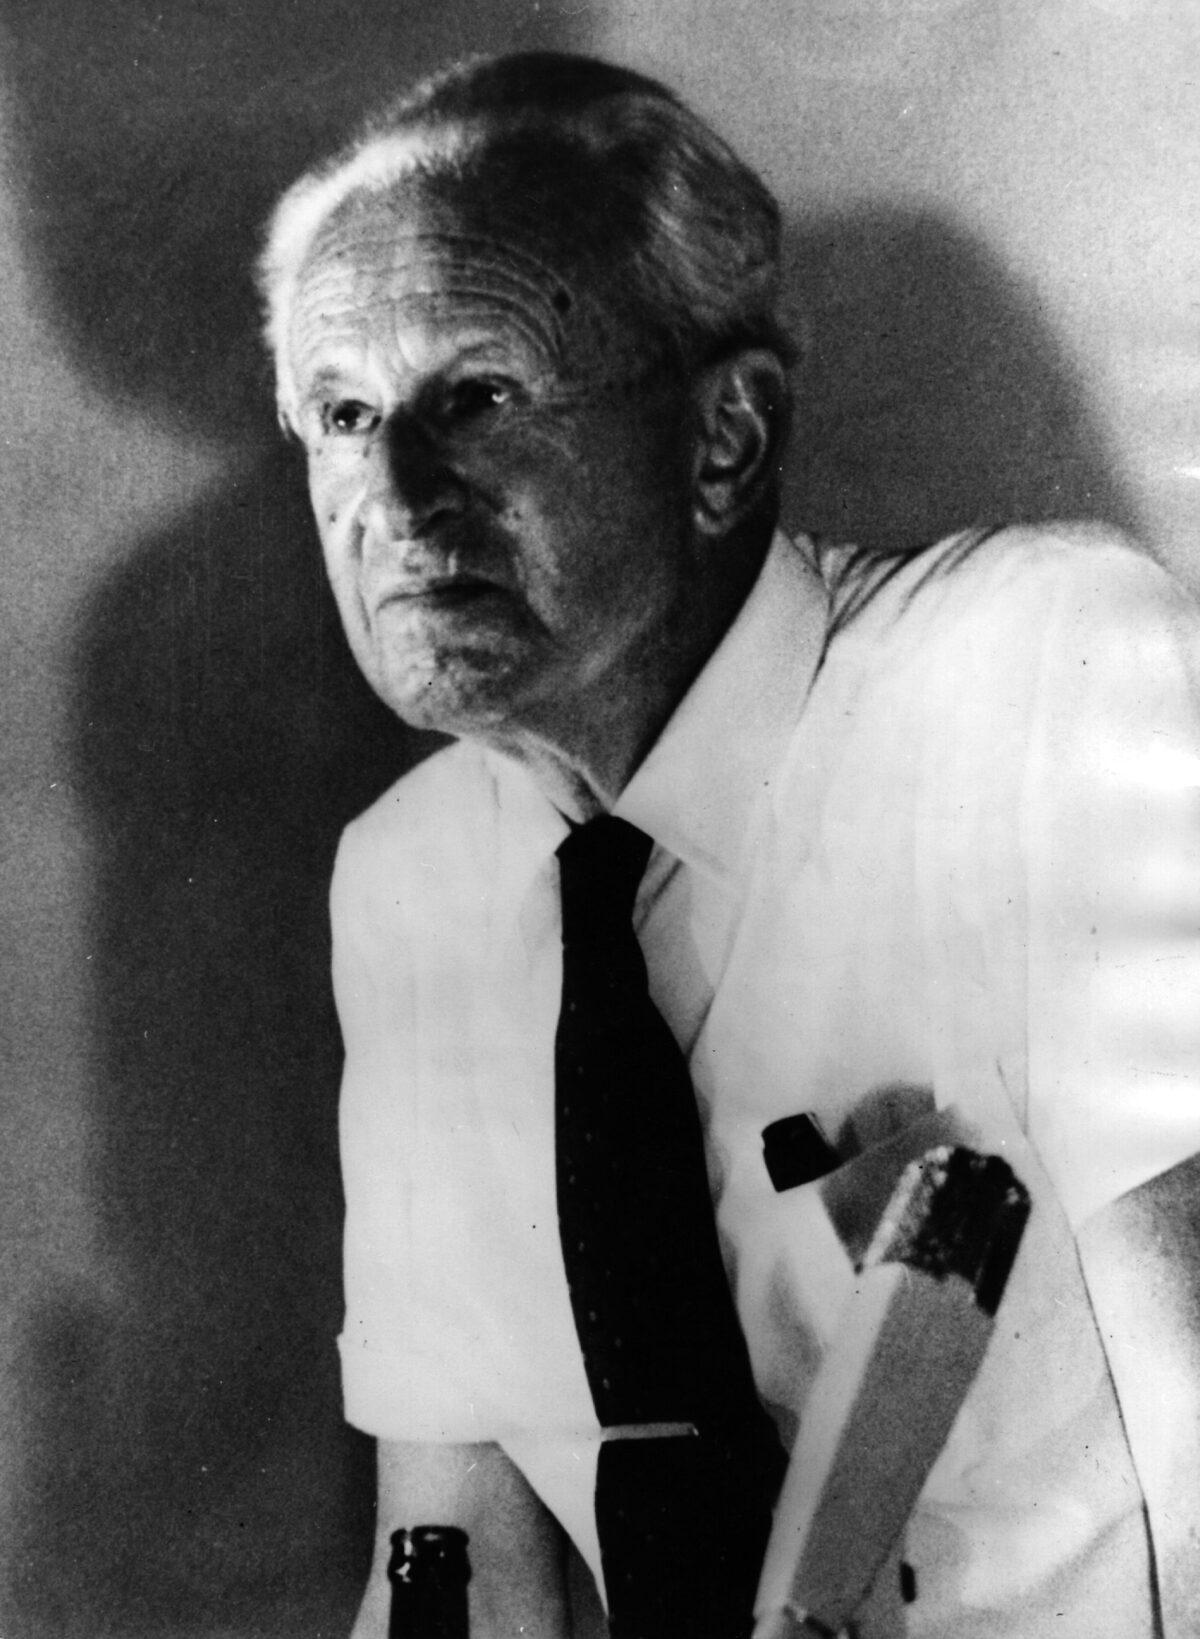 Herbert Marcuse (1898-1979), German-born American philosopher and radical political theorist, associated with the Frankfurt School of Critical Theory. (Keystone/Getty Images)